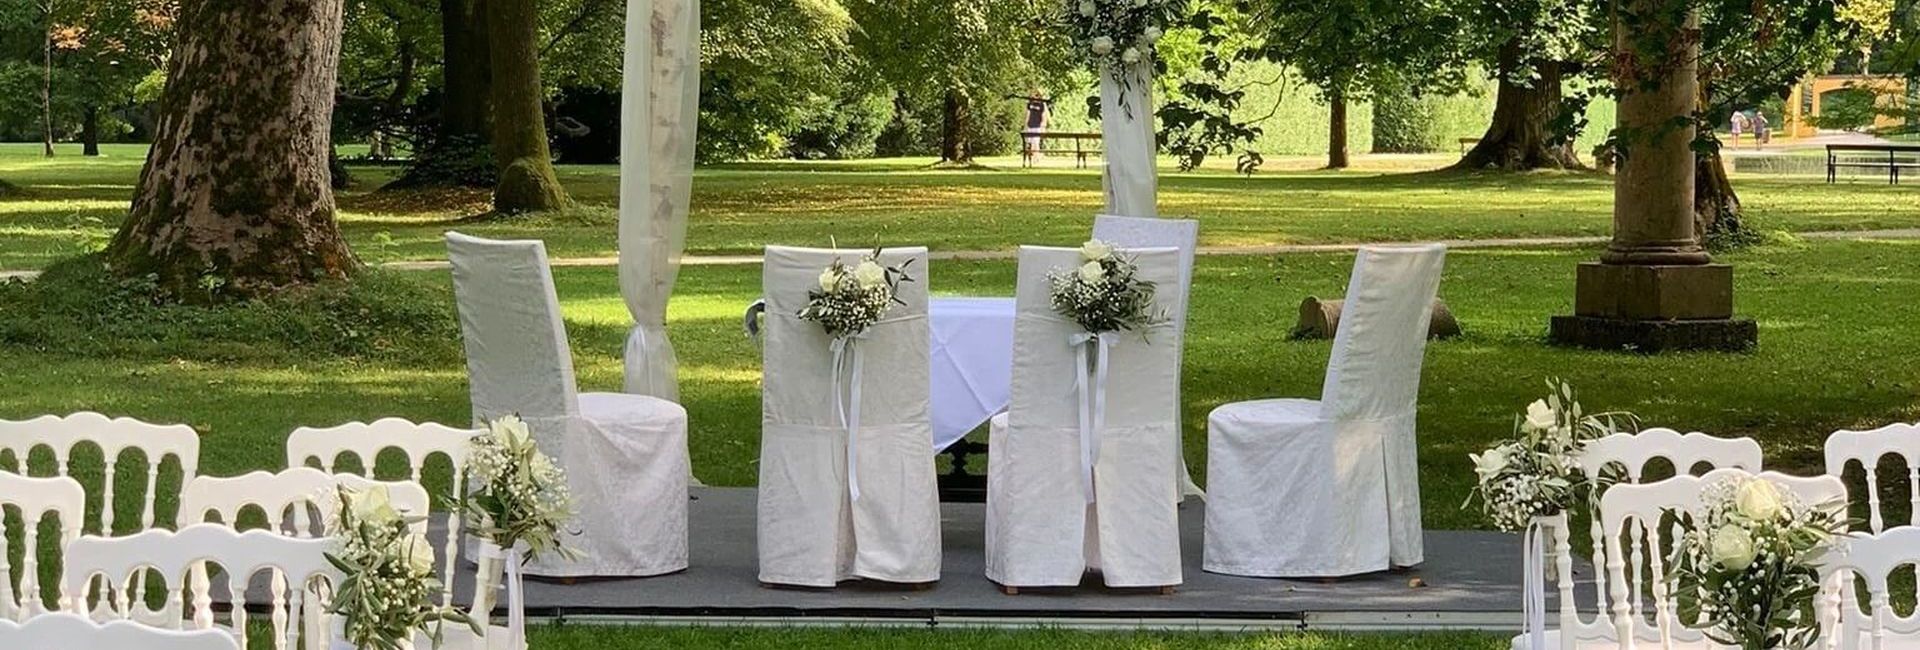 Solemnly prepared grandstand and white chairs for a civil wedding ceremony in the park of Schloss Hellbrunn in Salzburg